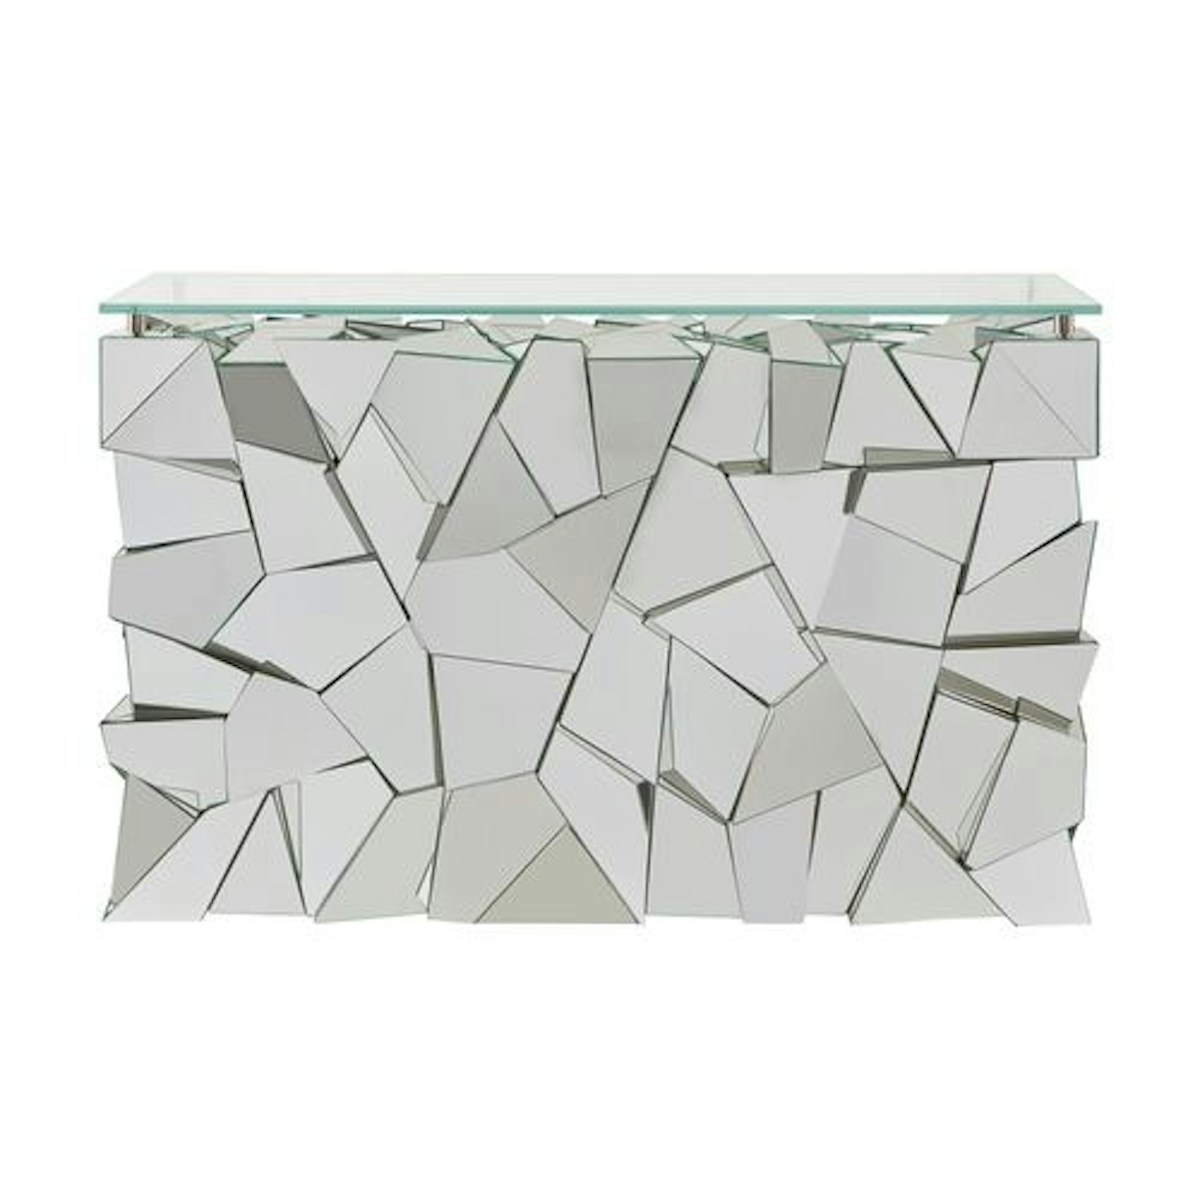 Mirrored table | Shop console tables online at LuxDeco.com